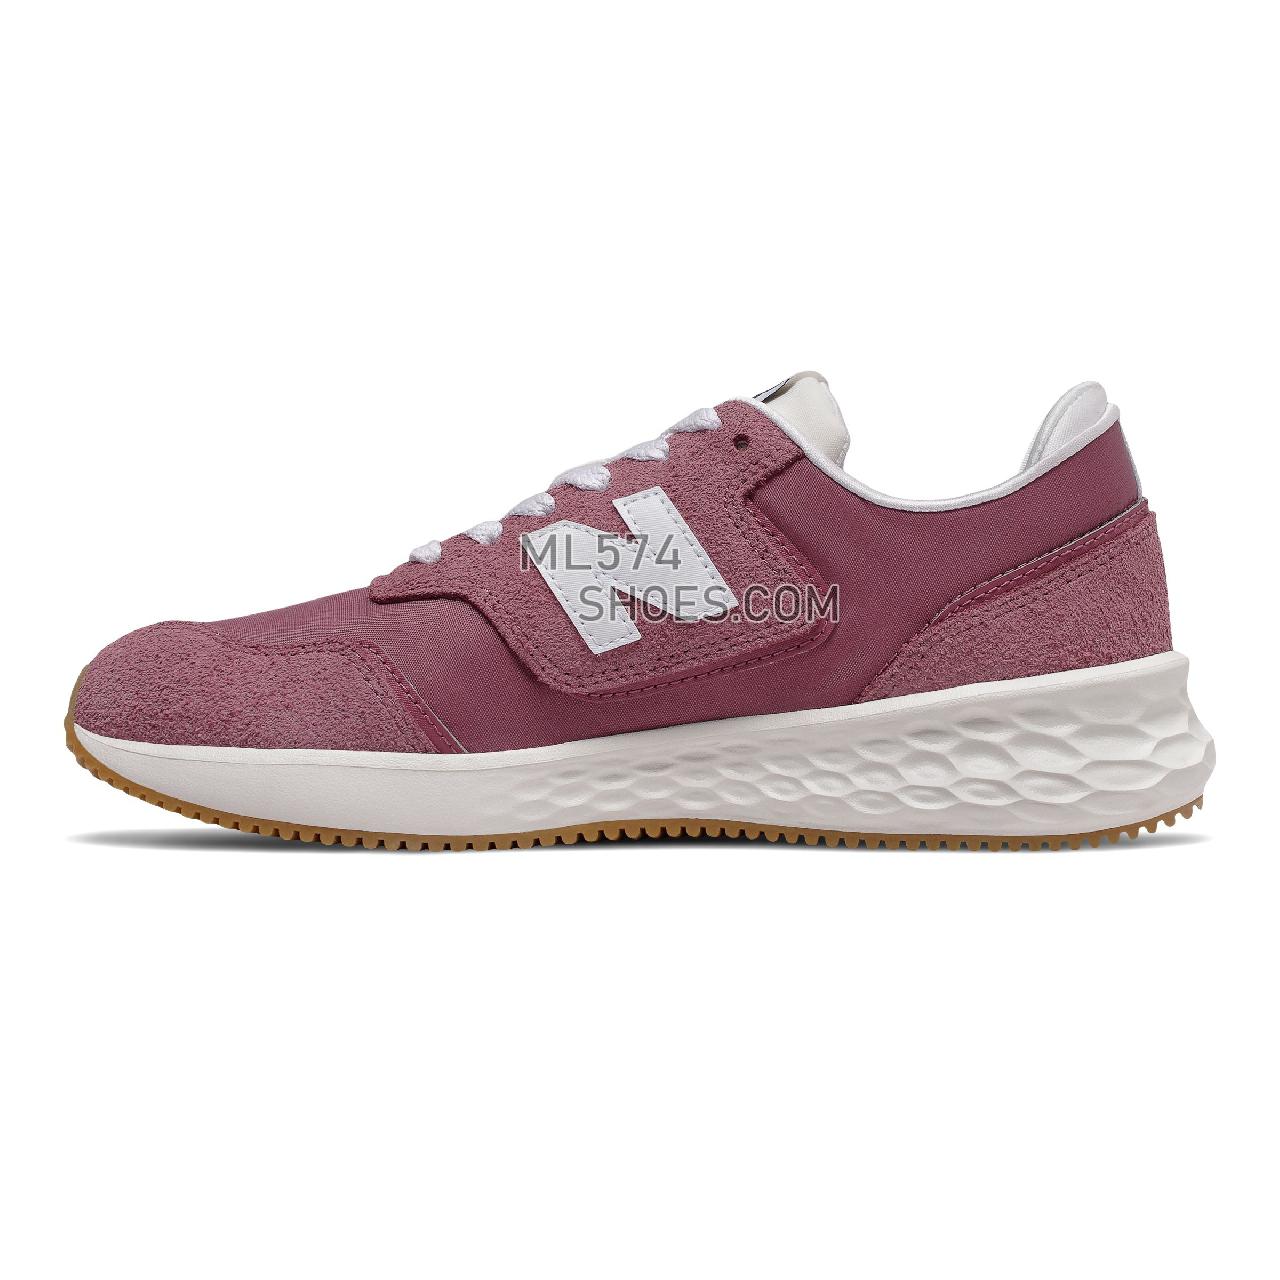 New Balance Fresh Foam X70 - Women's Sport Style Sneakers - Navajo Rose with Munsell White - WSX70YR